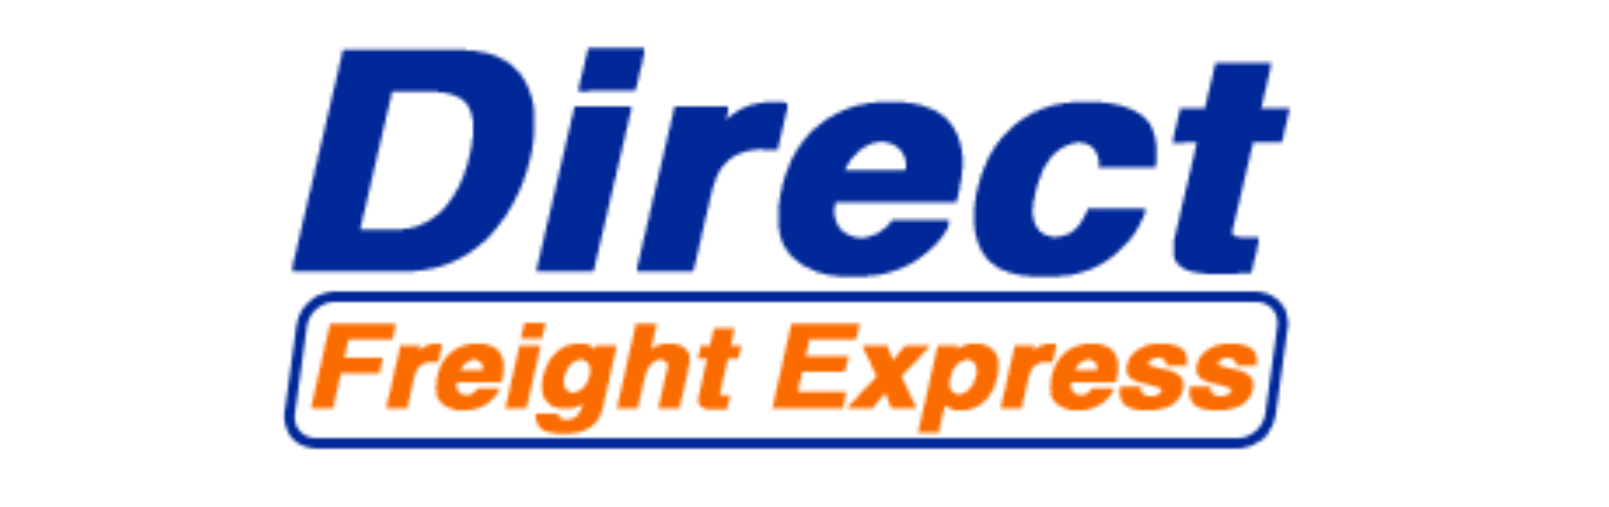 Direct Freight